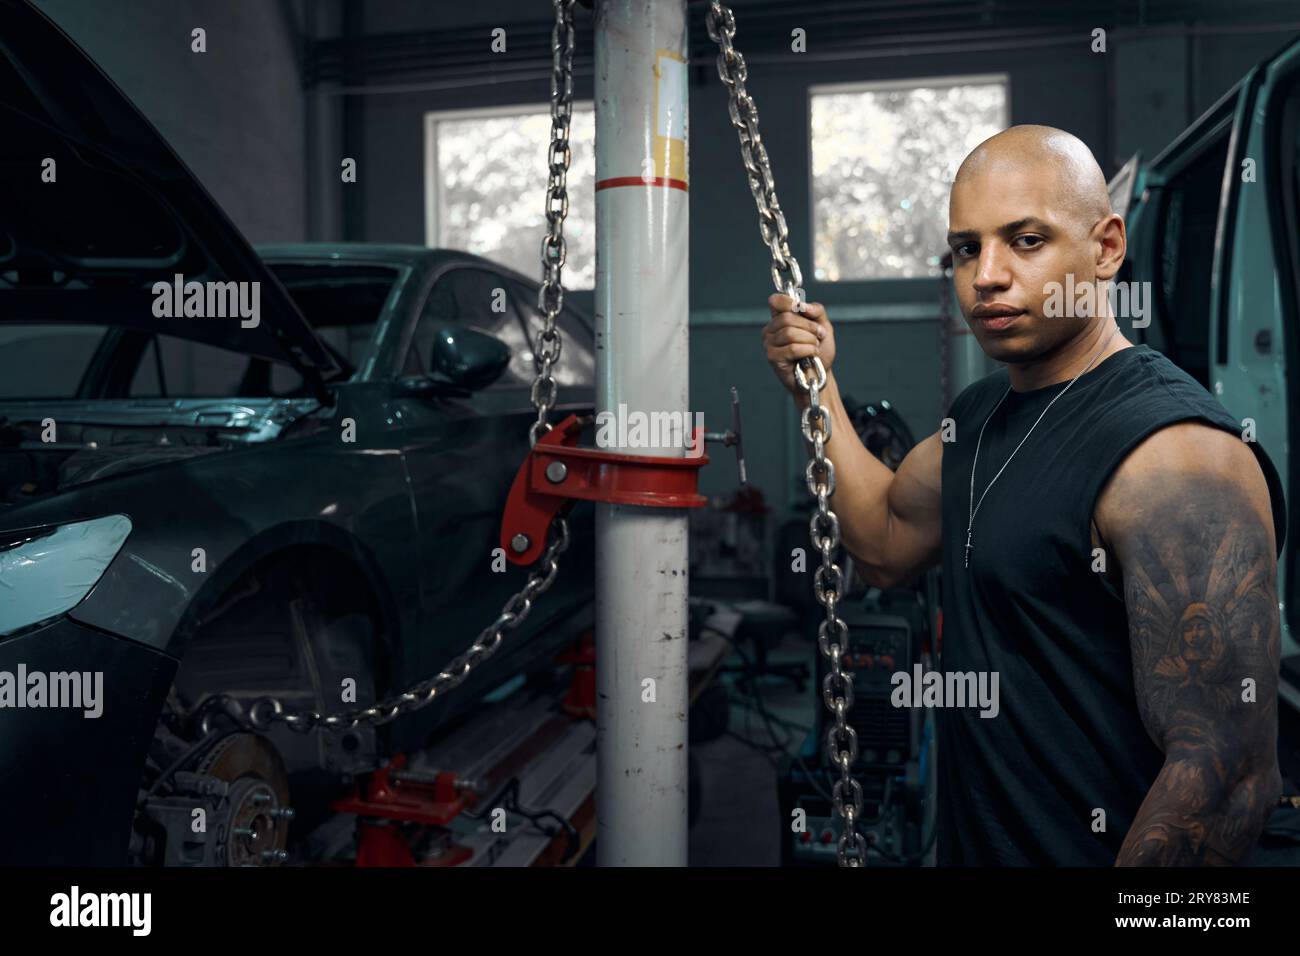 Auto mechanic holding chains that used to raise and lower motor vehicle Stock Photo